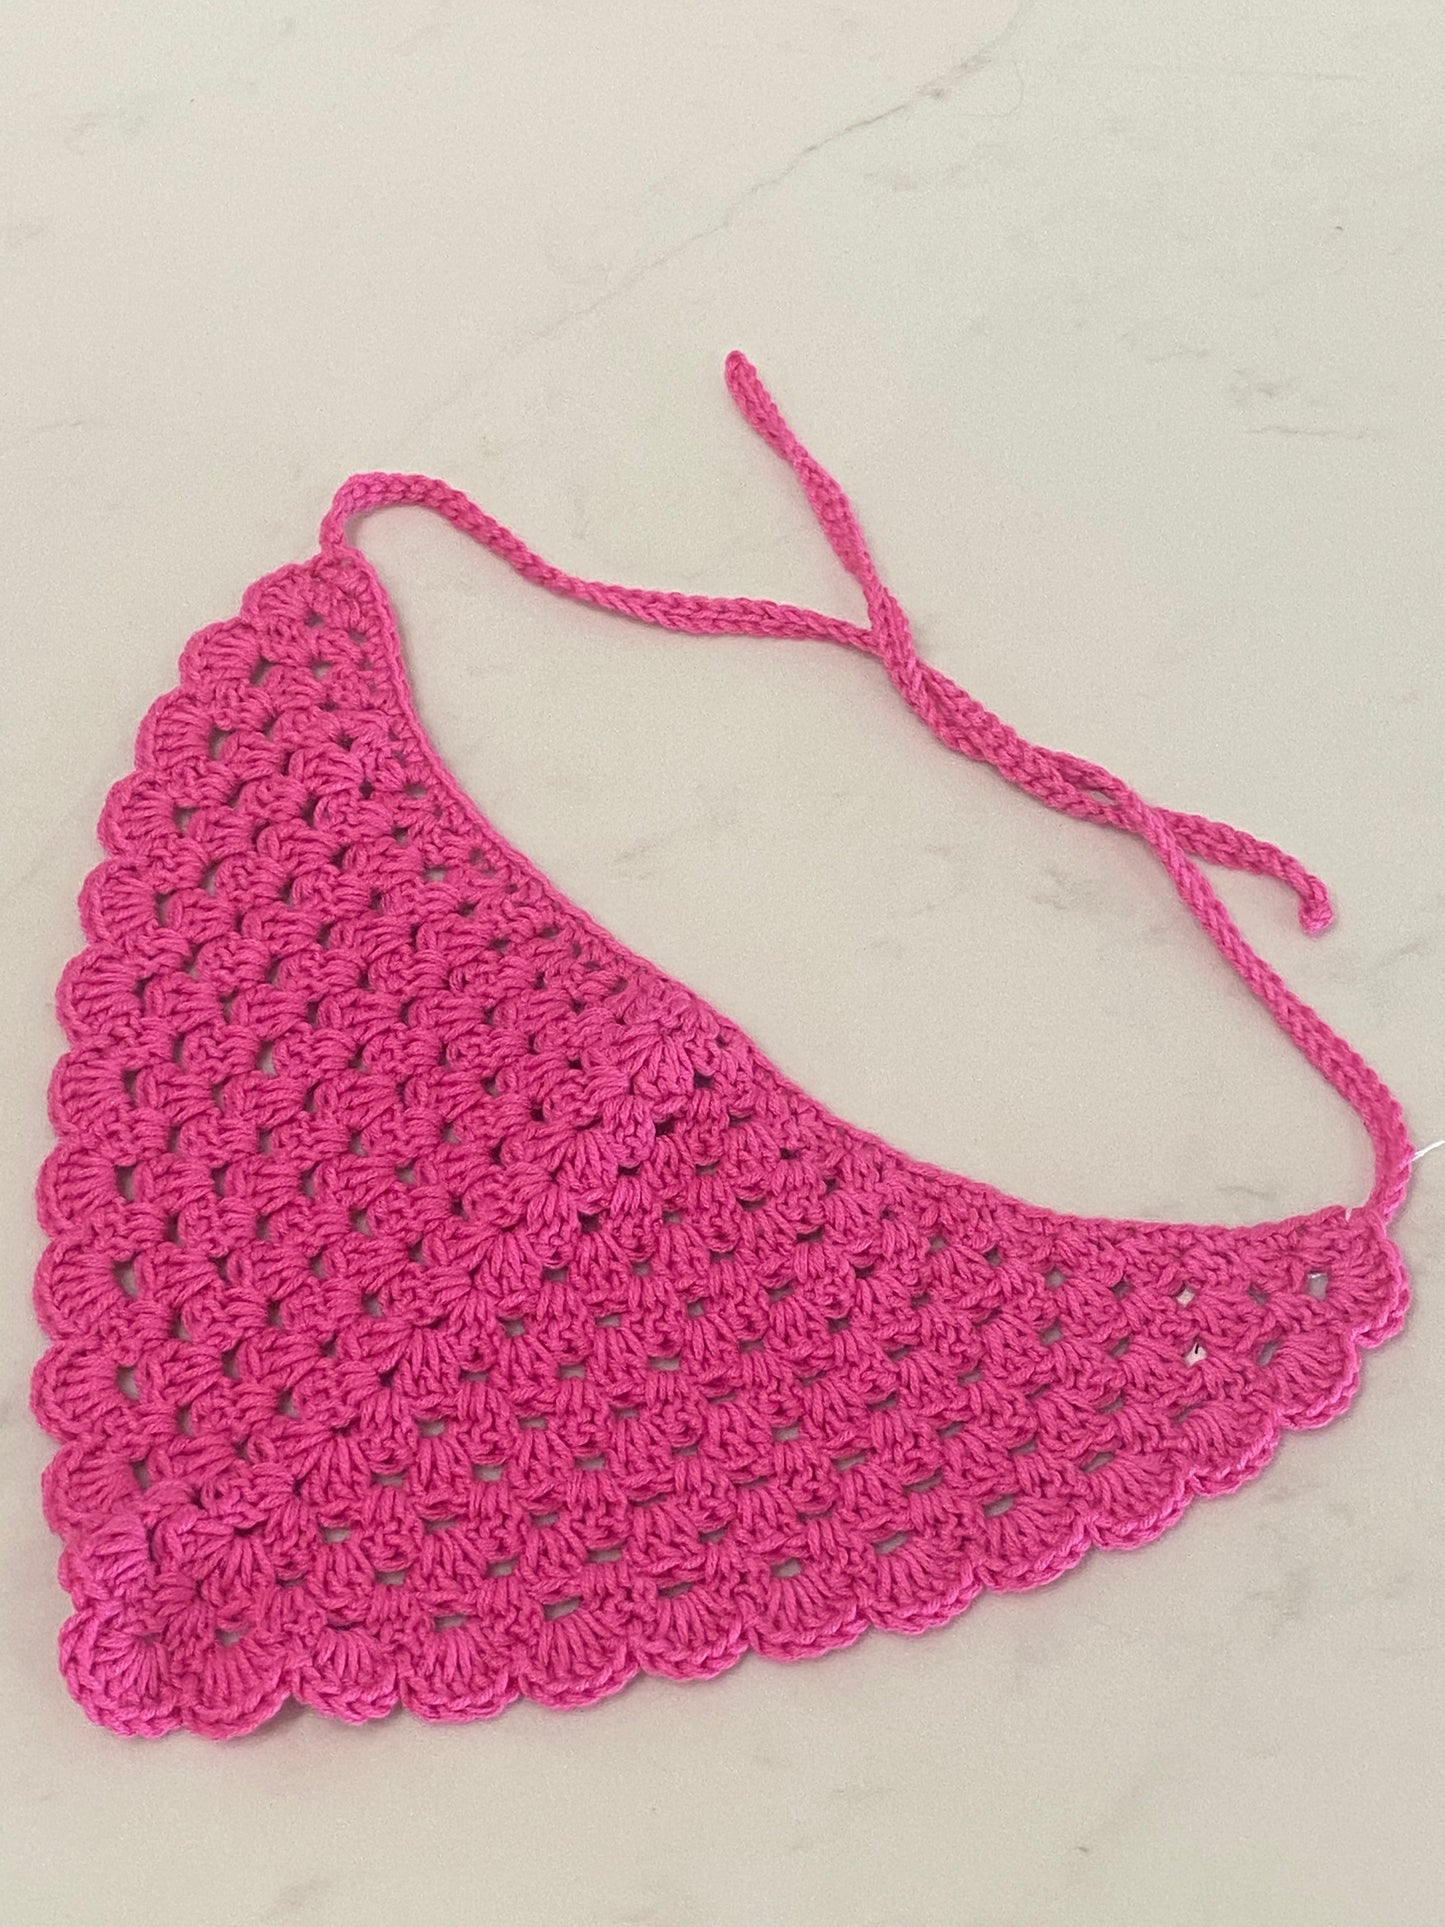 Crochet Bandana Scarf by Clever Stitches - Pink